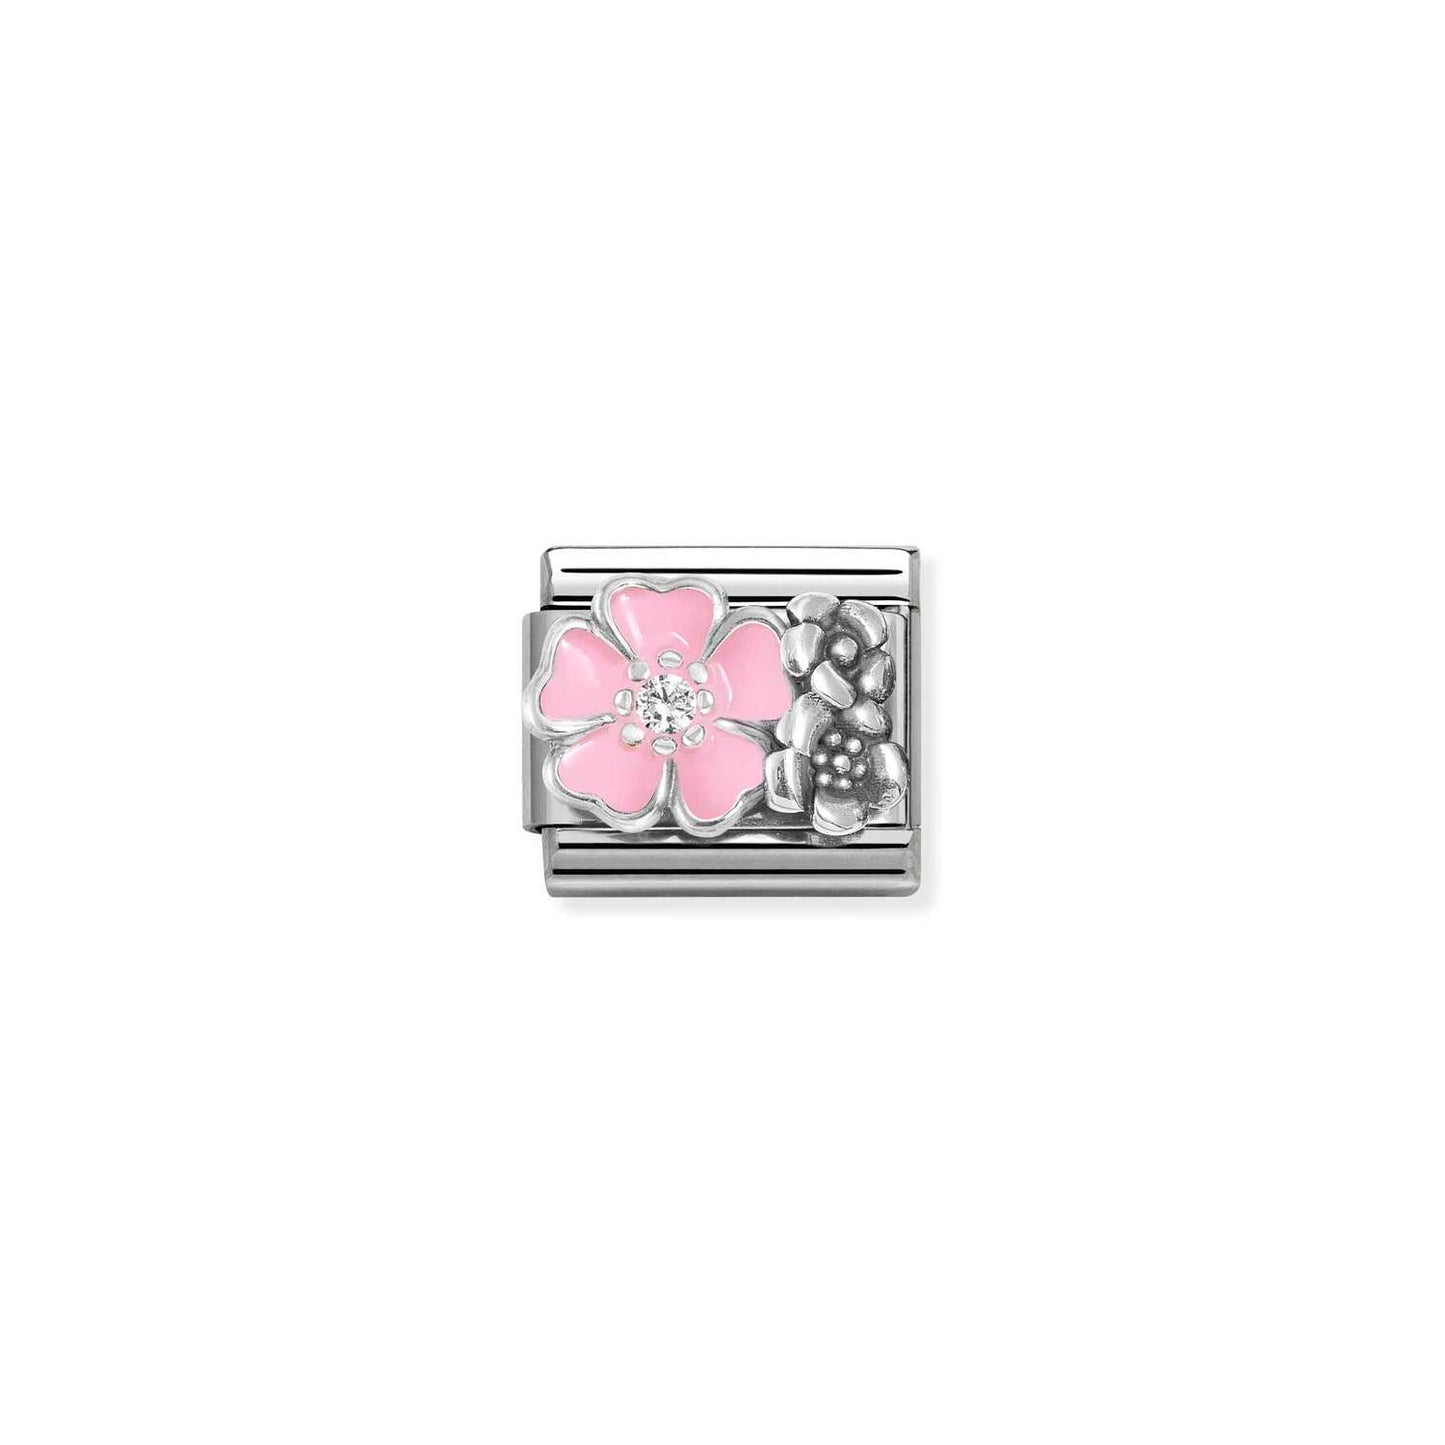 330325/02 Composable CL SYMBOLS OX, in steel, enamel, cz and 925 sterling silver (02_ROSE flower with flowers)